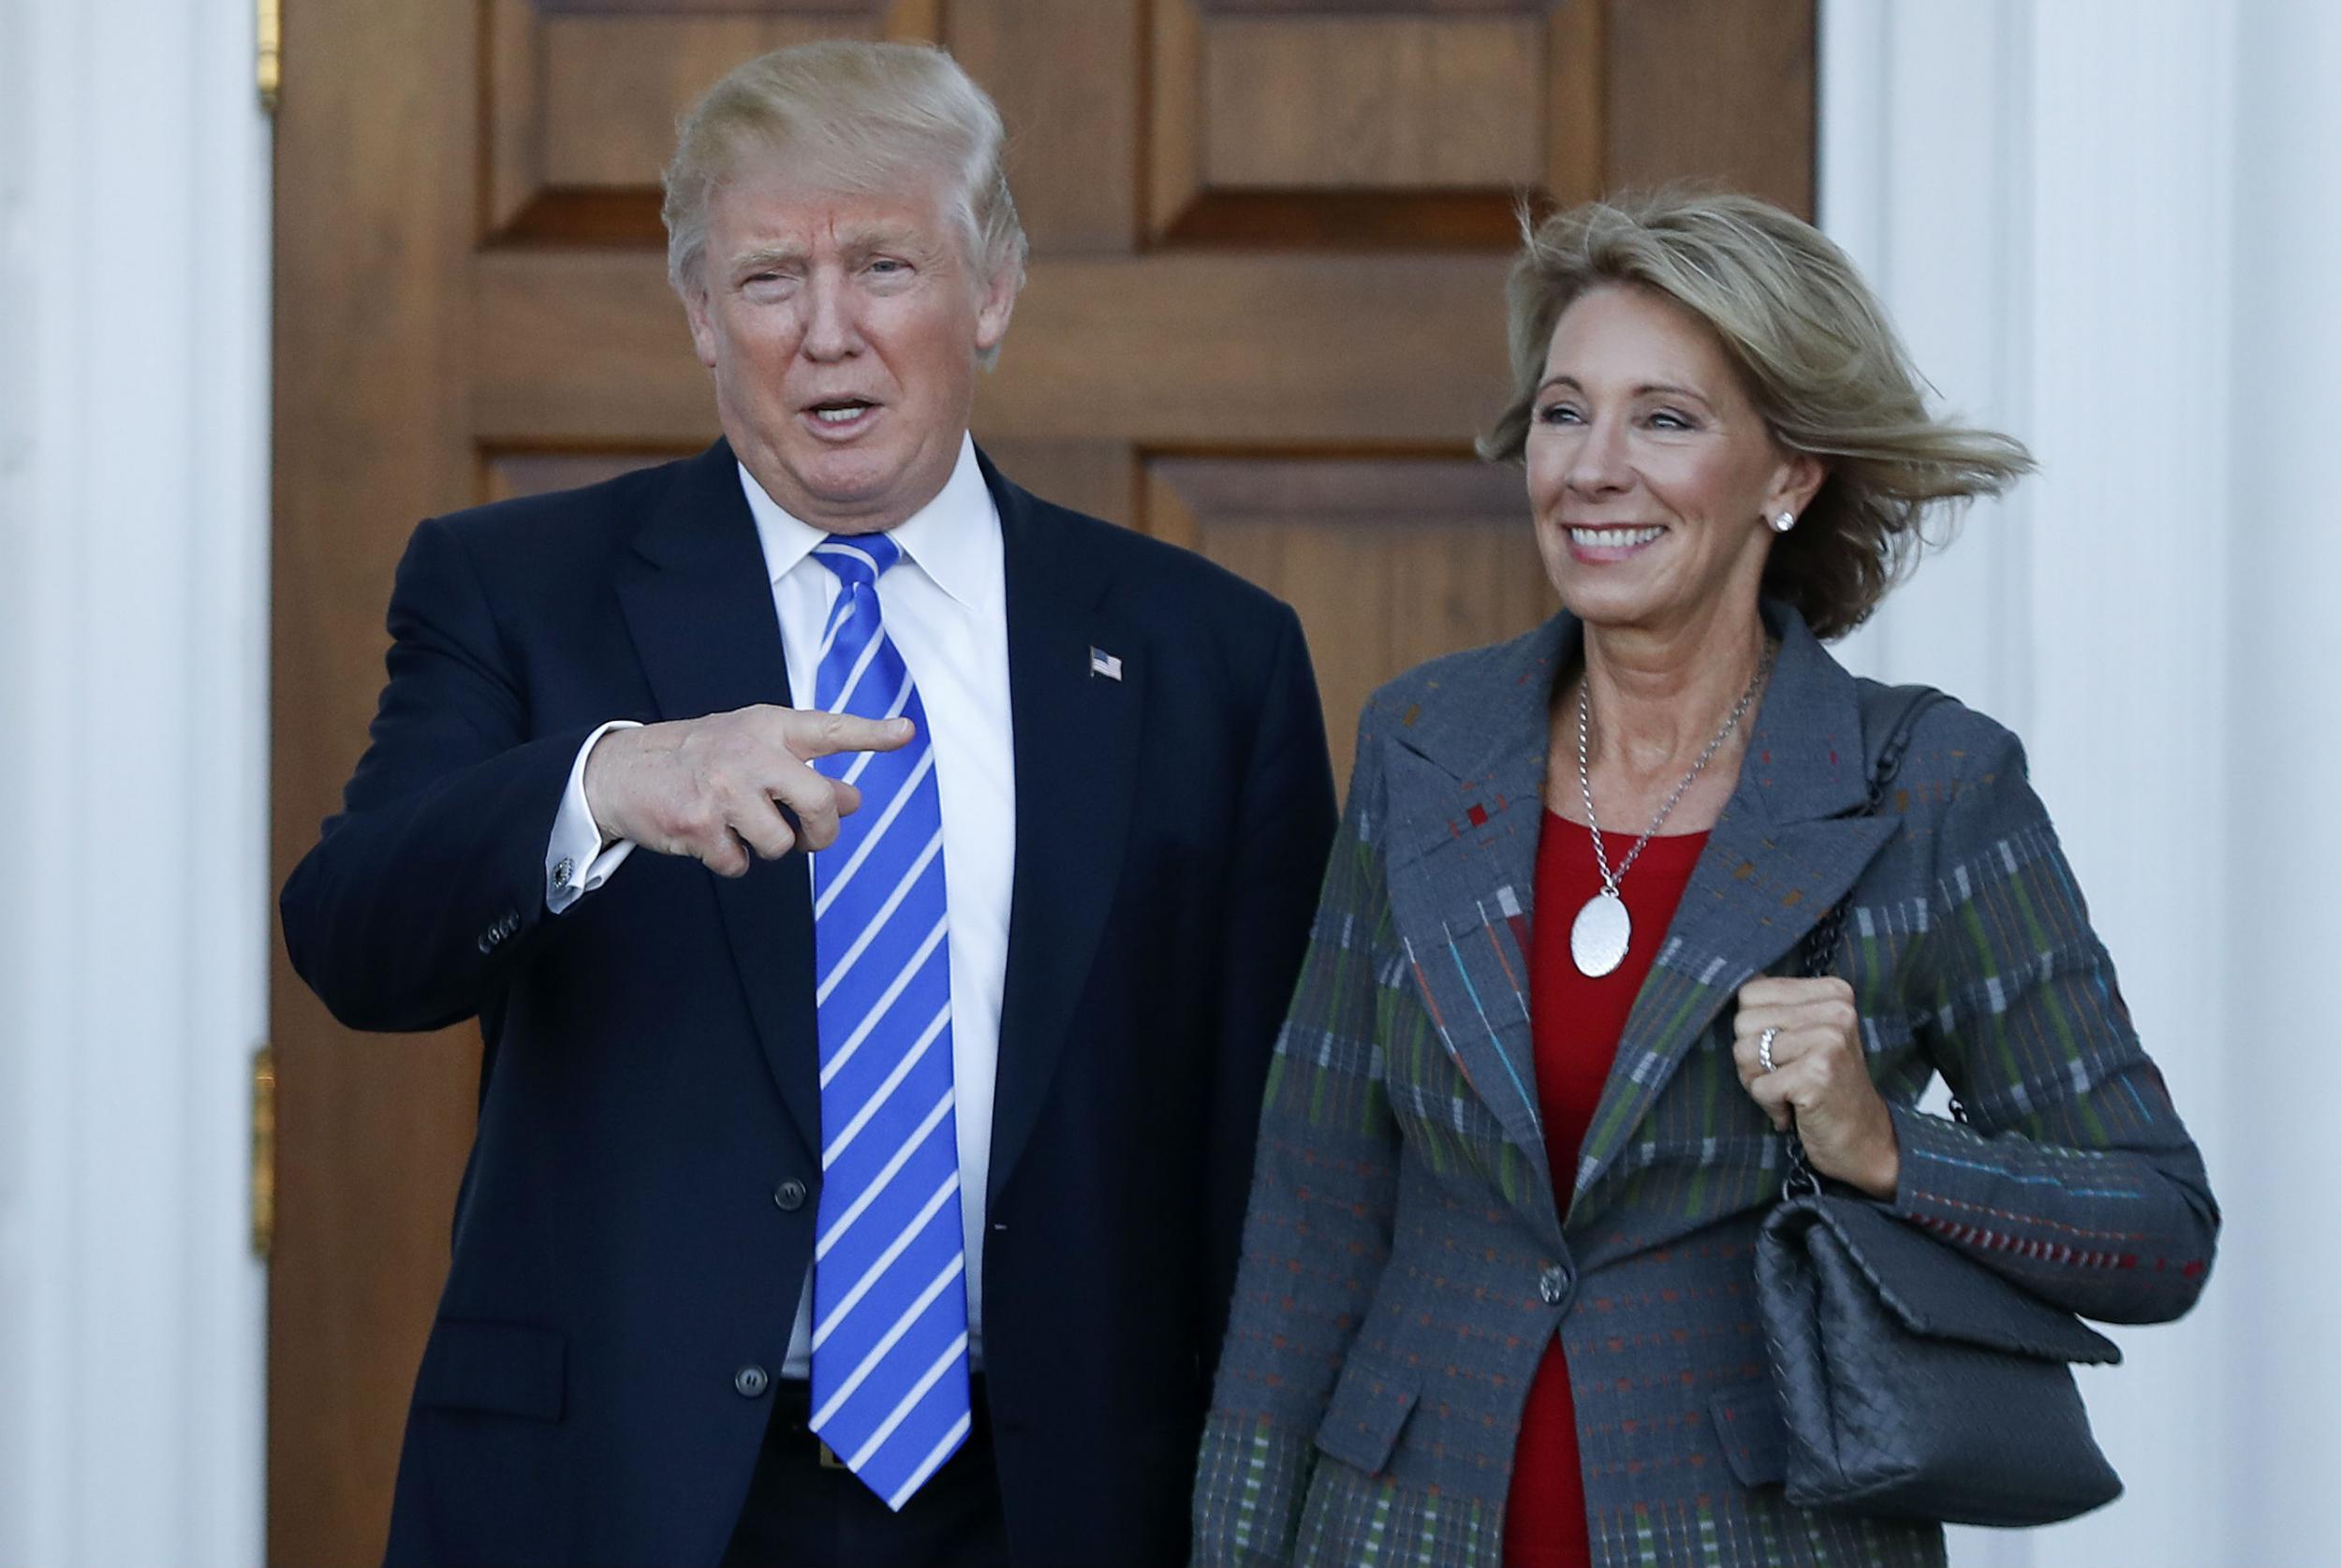 Betsy DeVos, Mr Trump's nominee for Education Secretary, has not yet been fully vetted